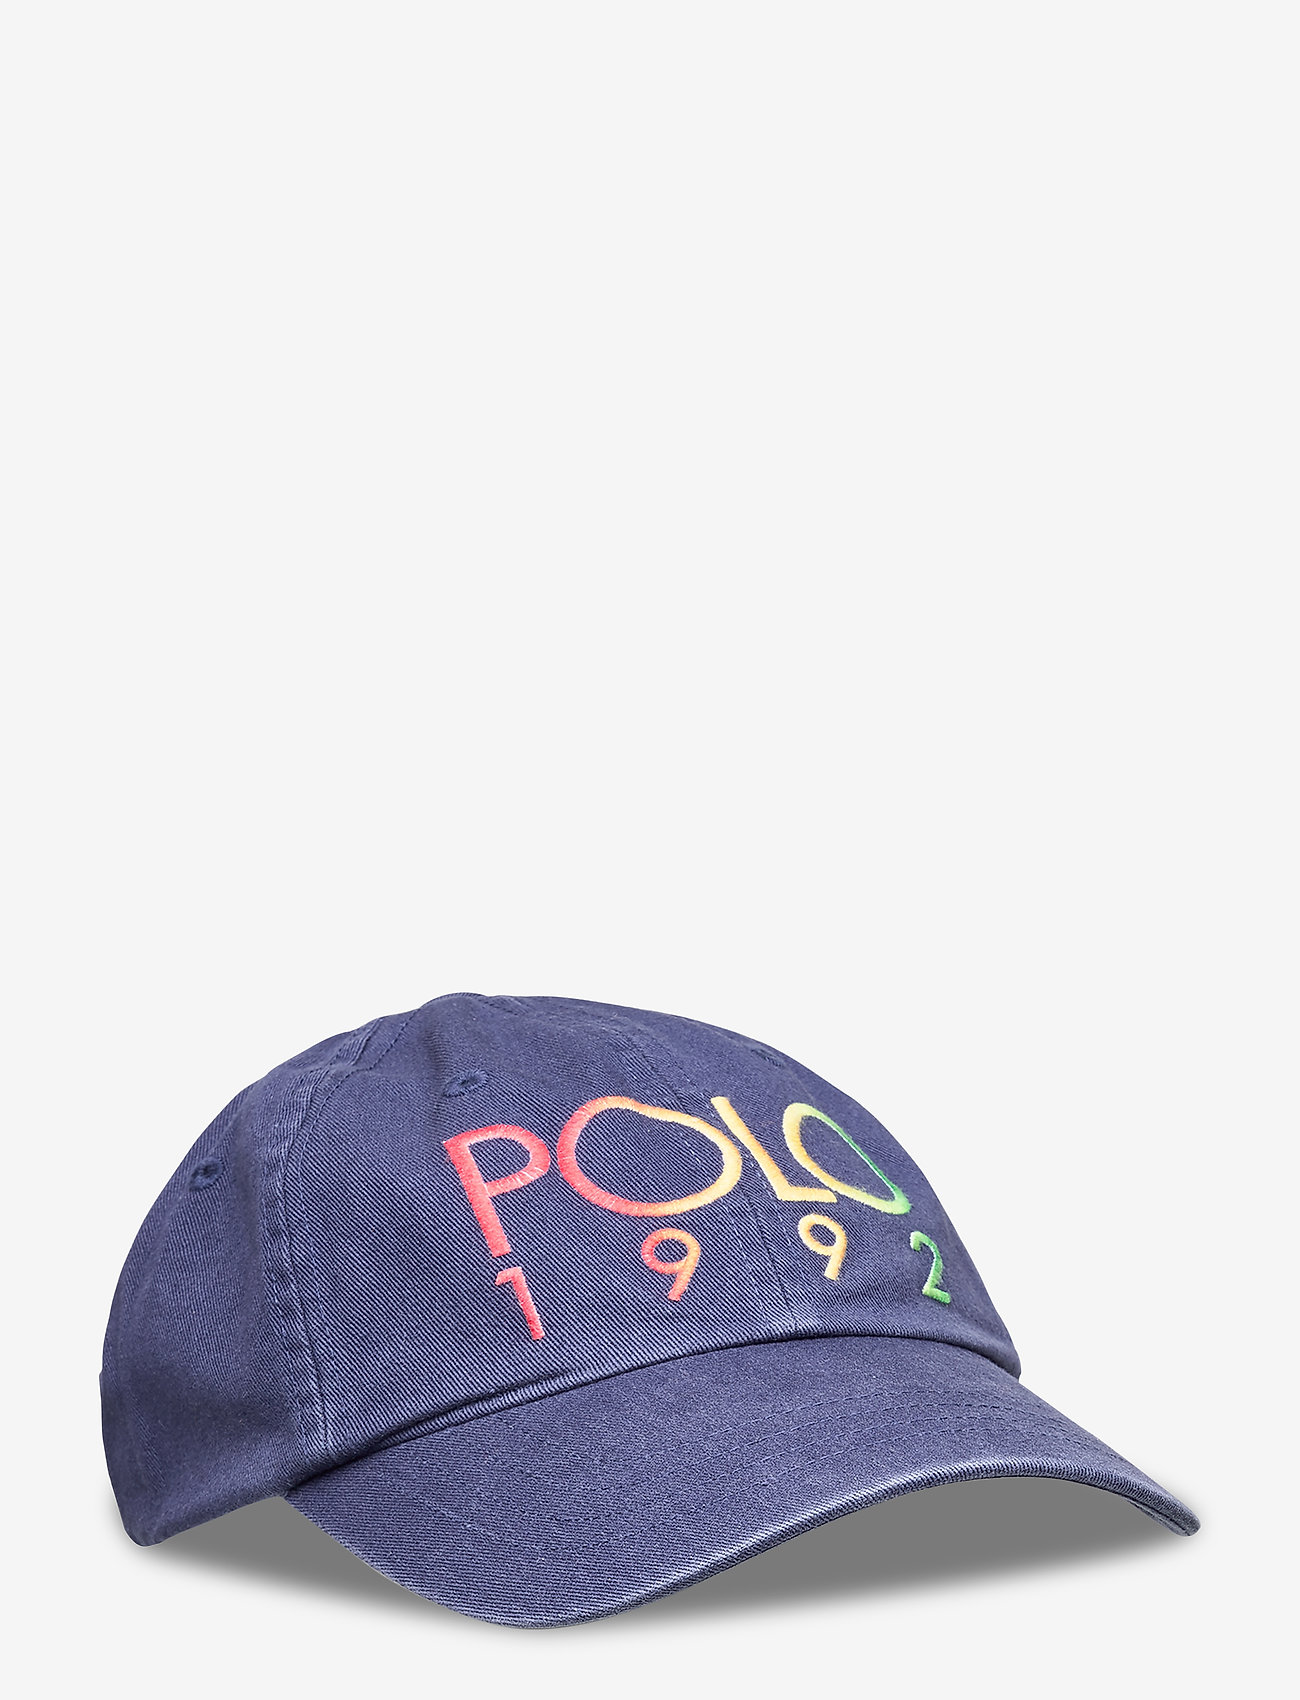 1992 polo hat